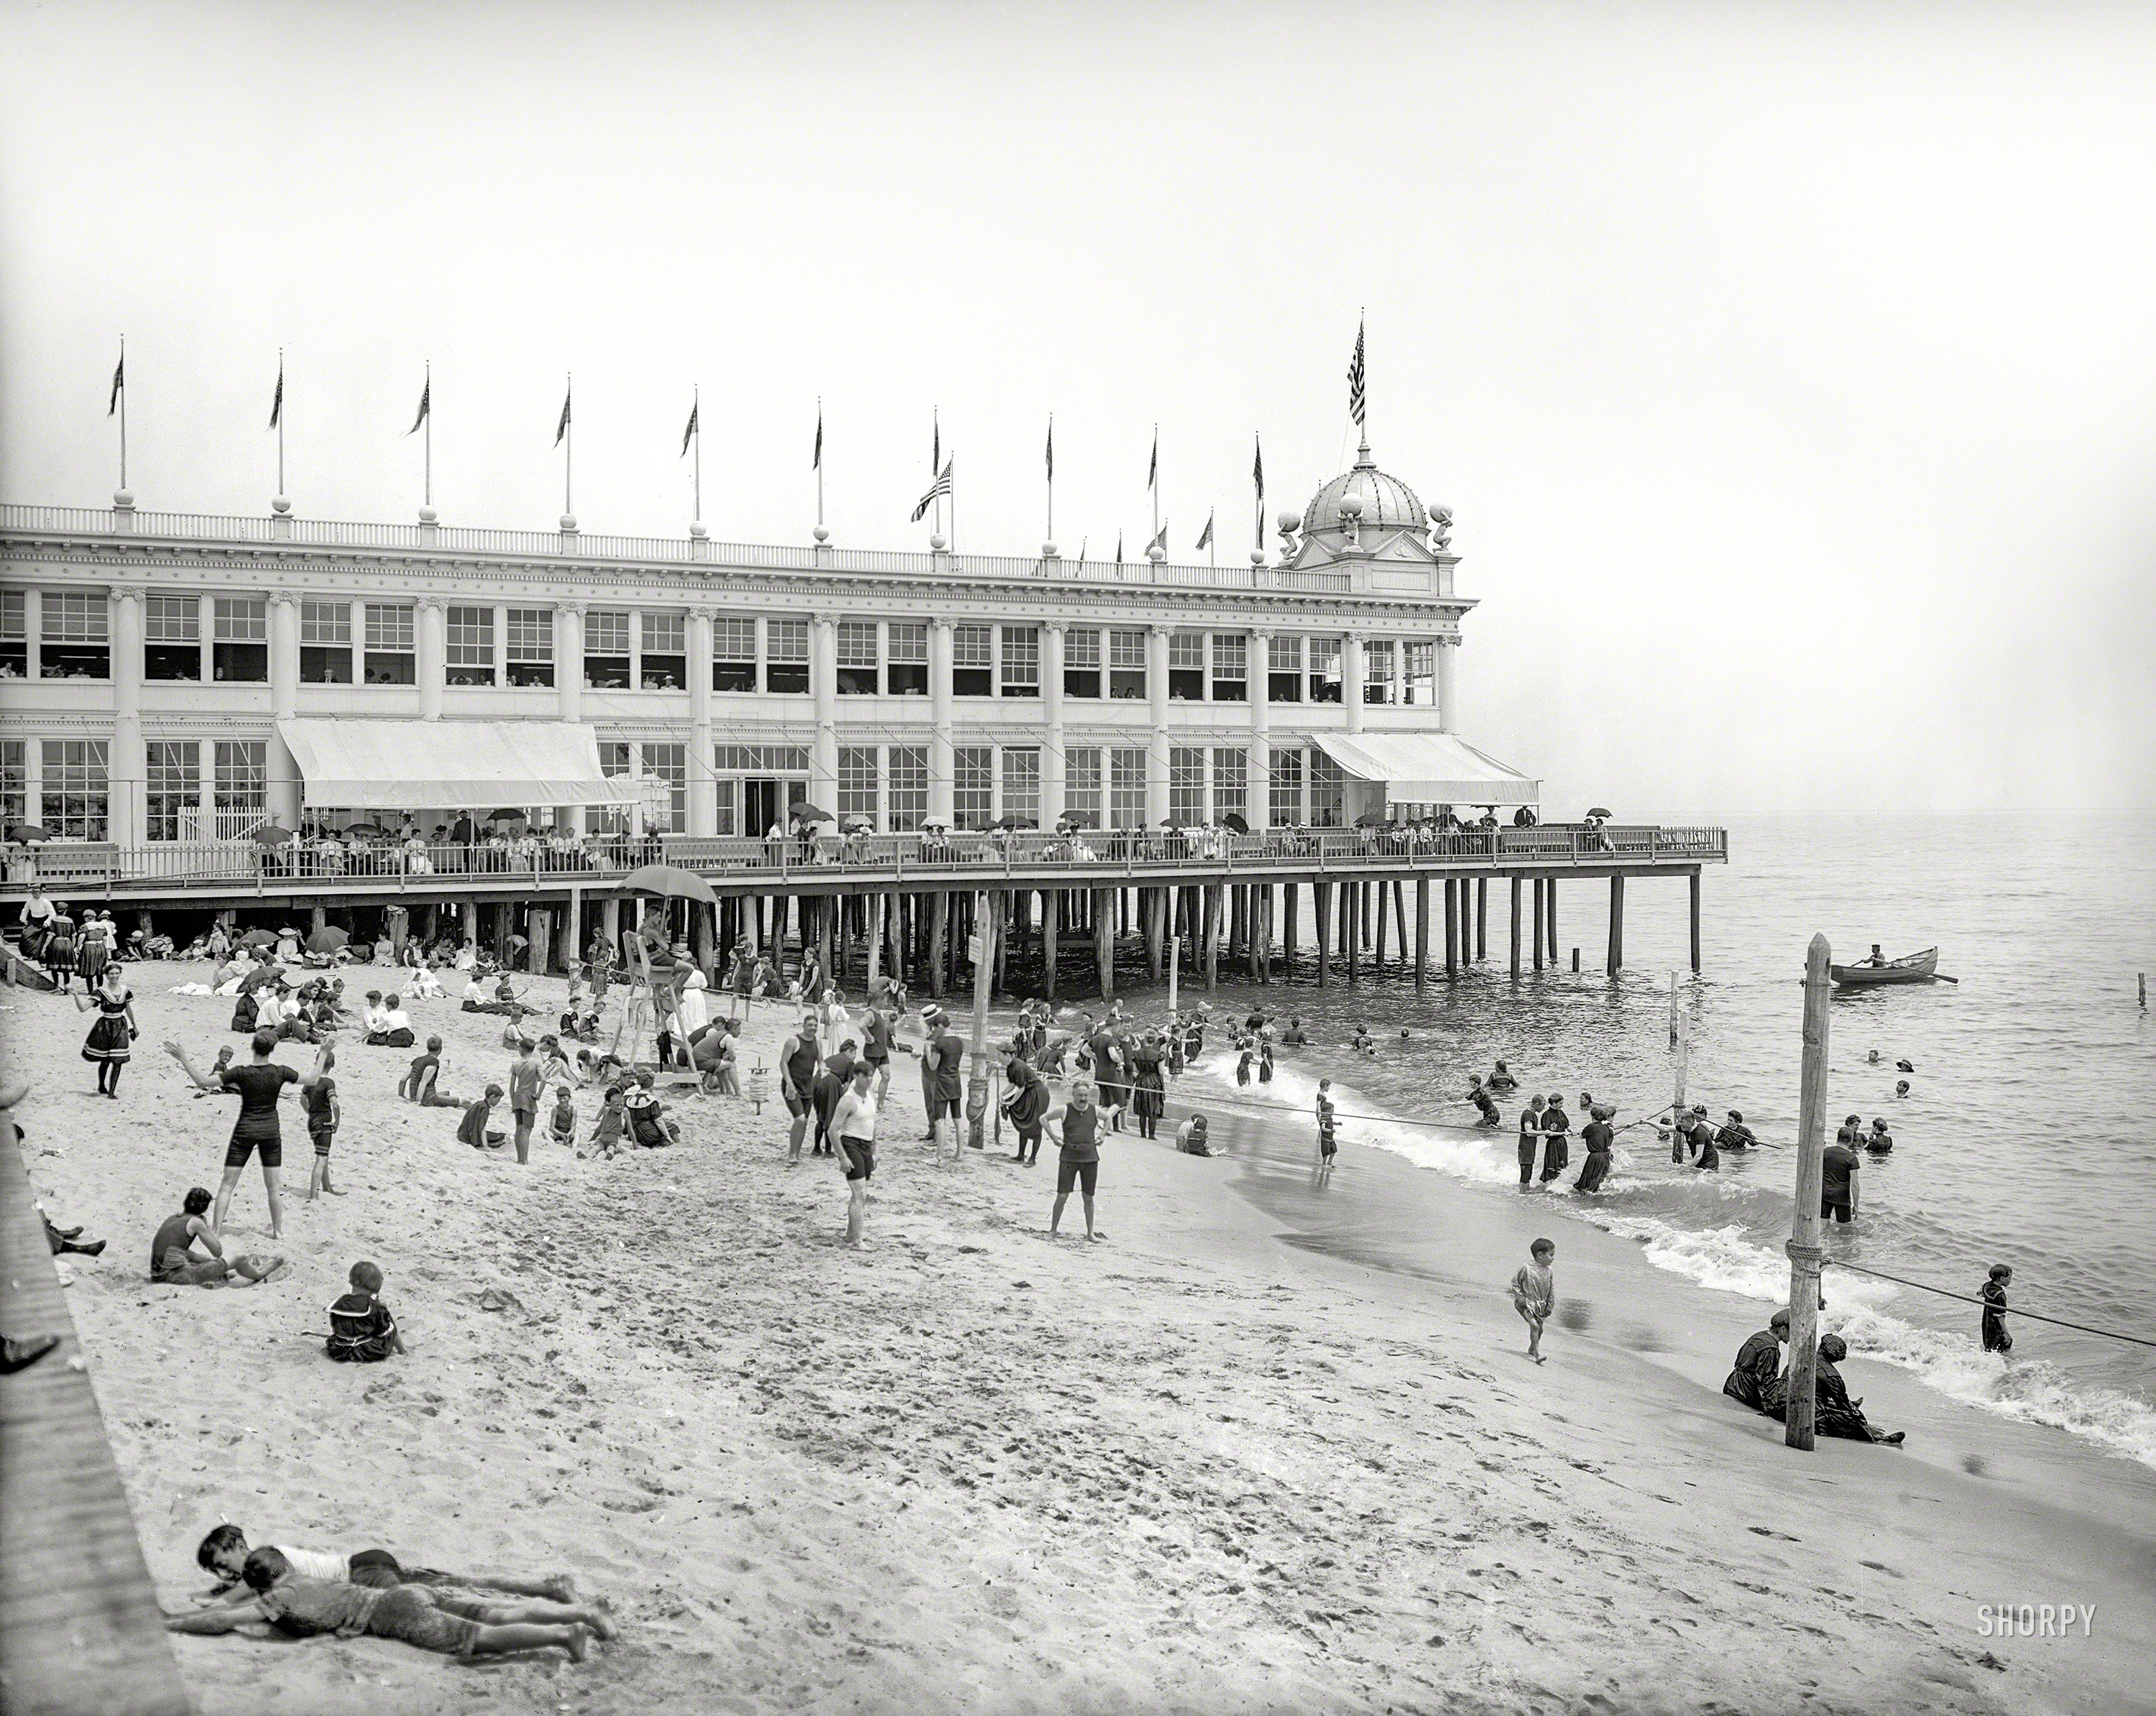 The Jersey Shore circa 1905. "The Casino, Asbury Park." Greetings from your great-great grandparents. 8x10 inch dry plate glass negative. View full size.